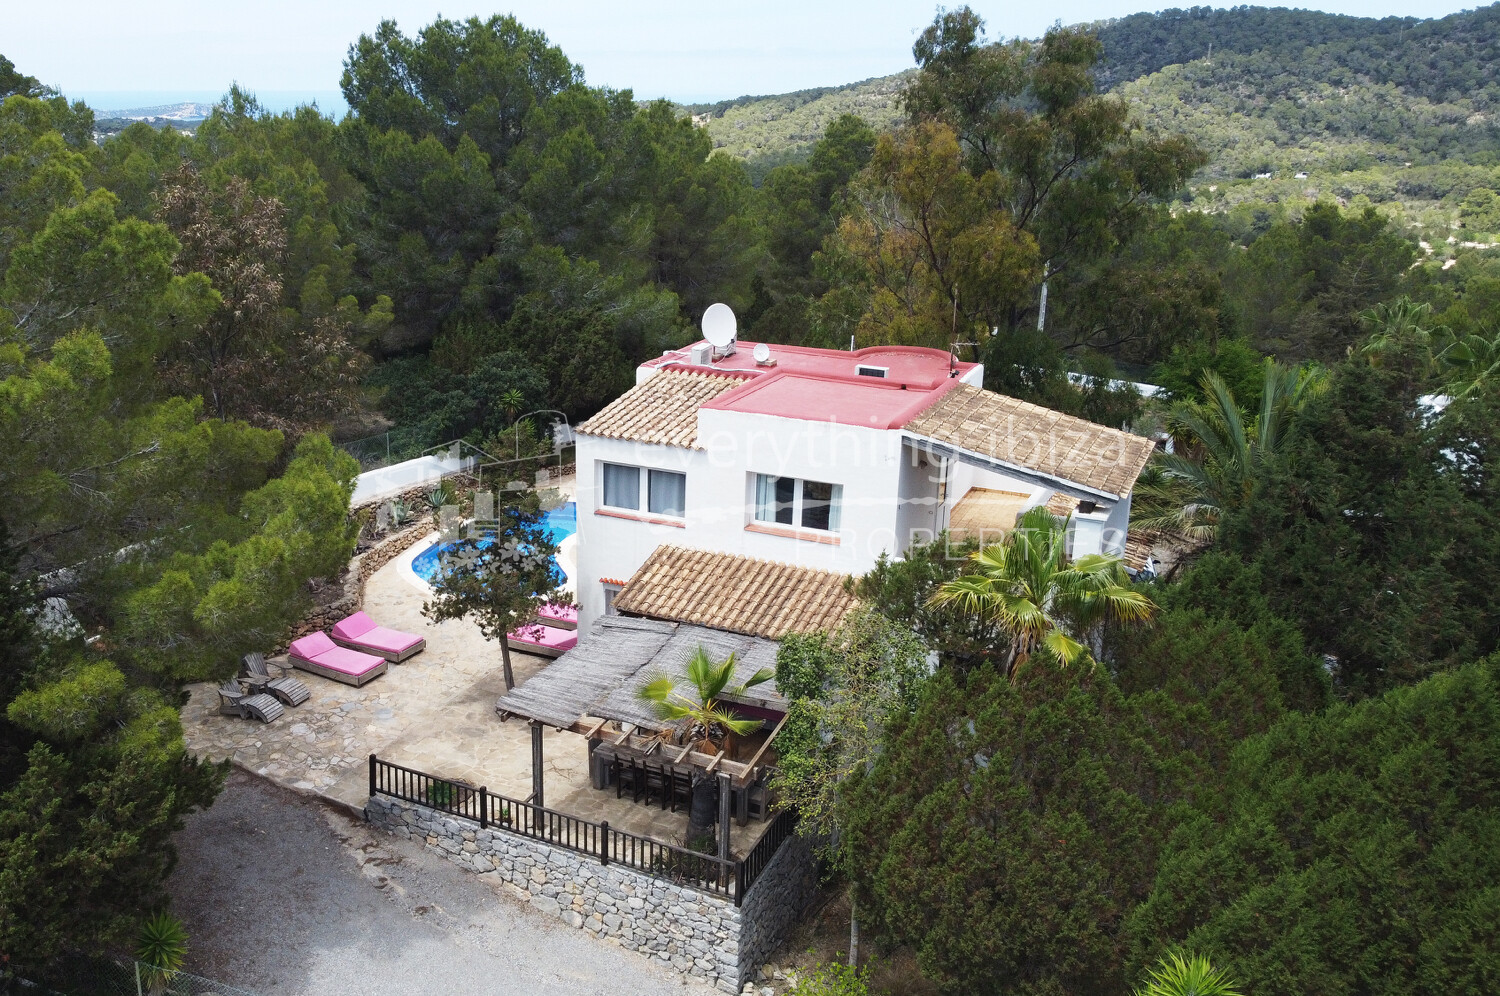 Charming Traditionally Styled Detached Villa in Country Surroundings, ref. 1604, on sale in Ibiza by everything ibiza Properties